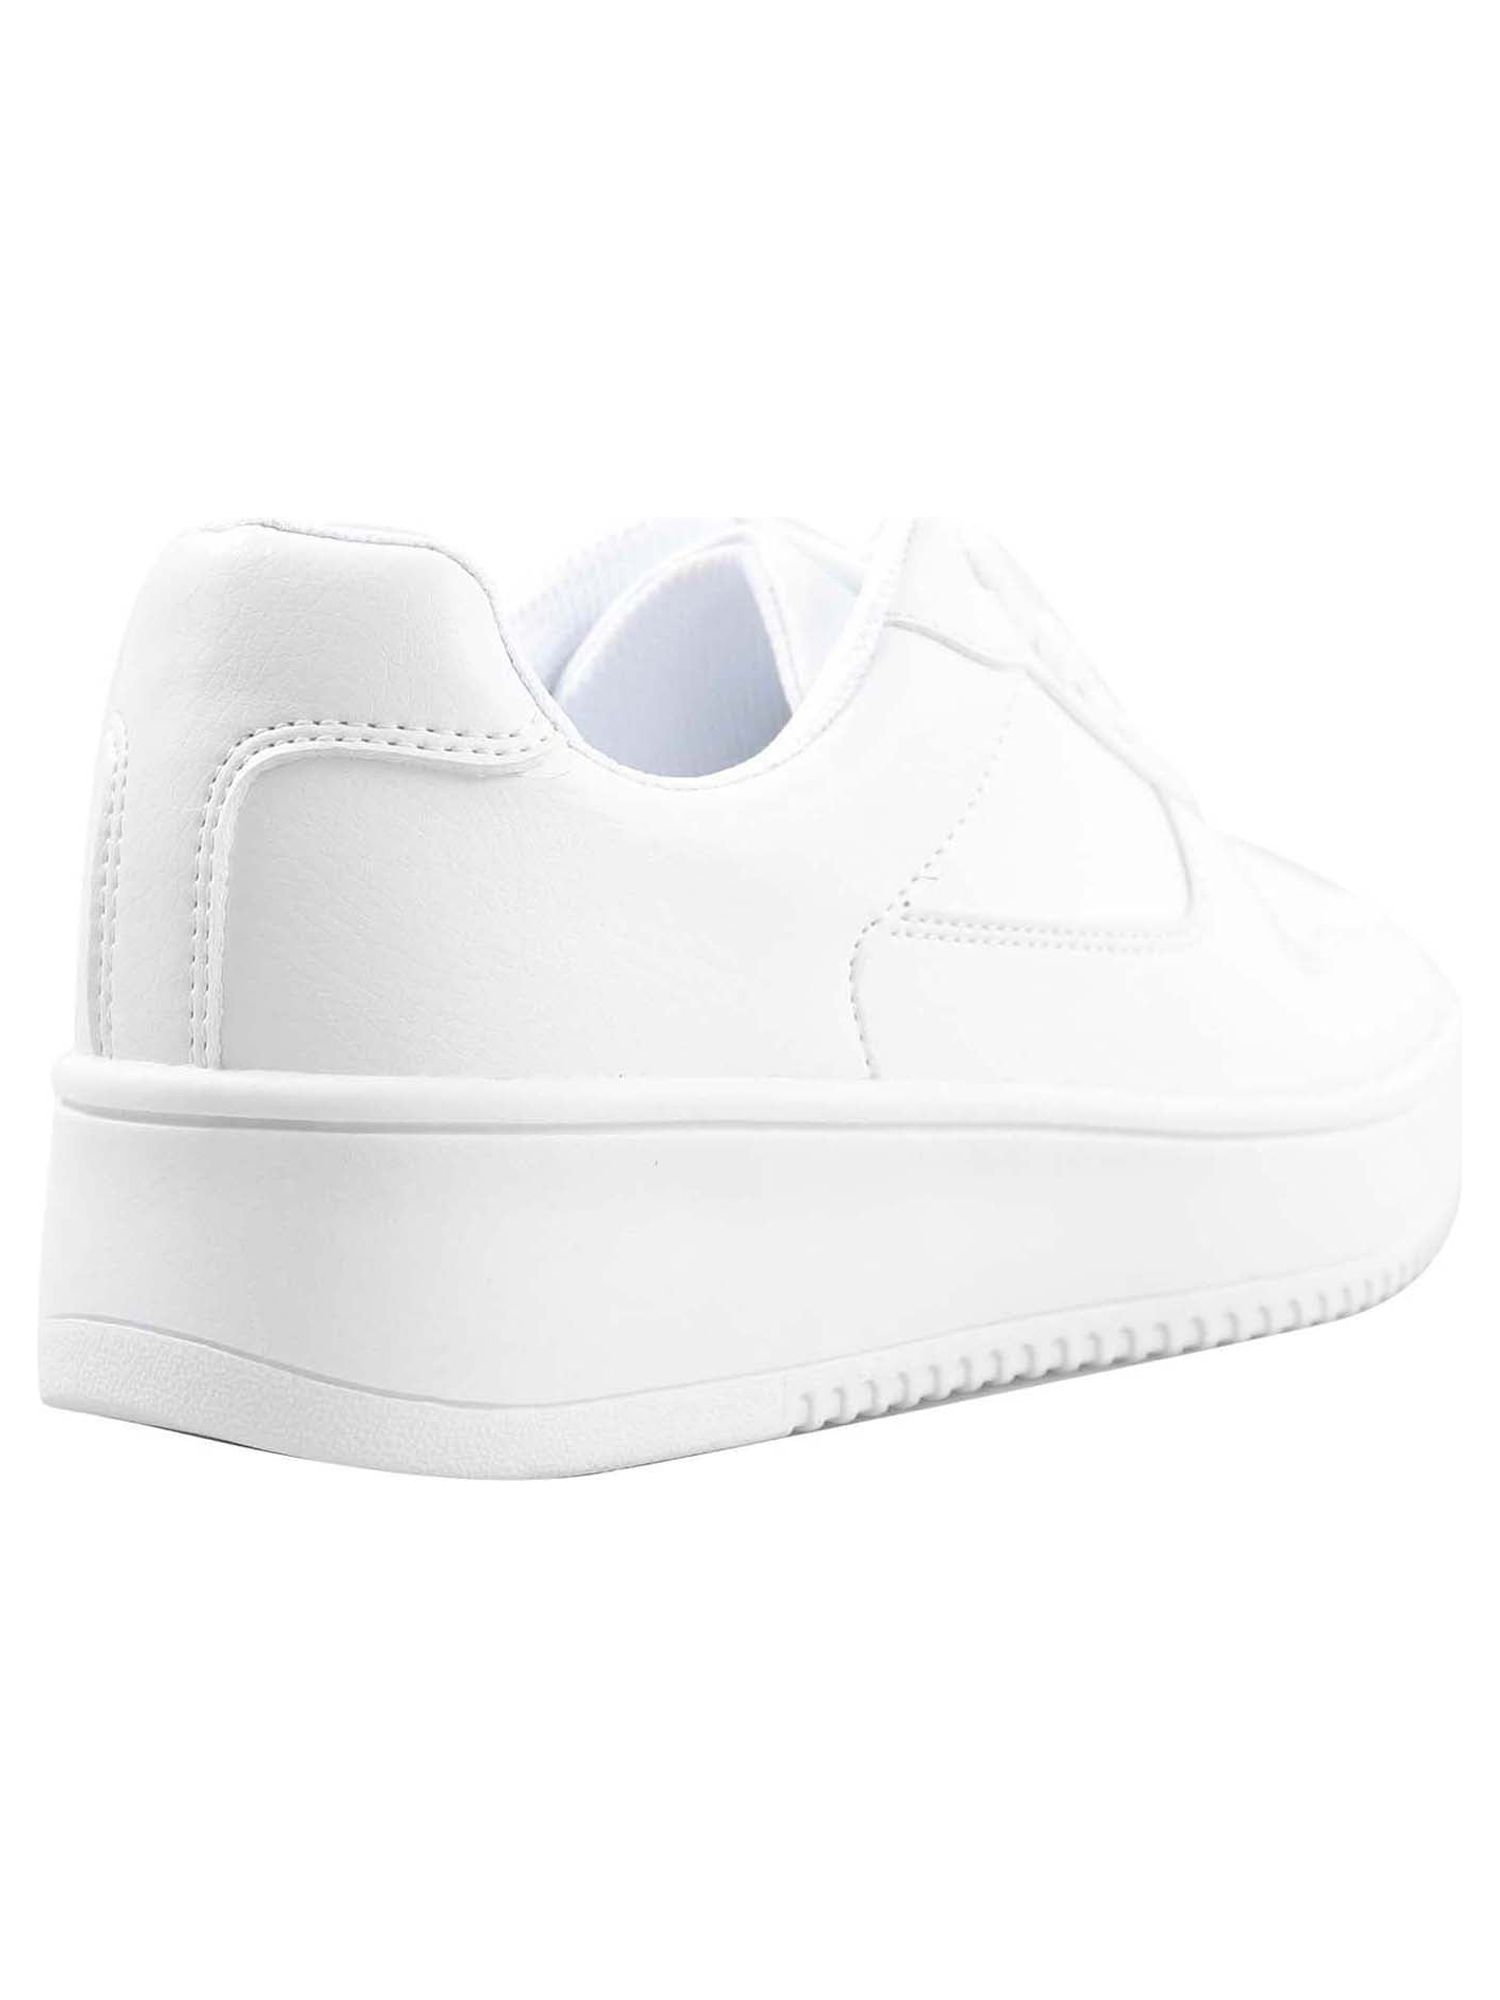 Time and Tru Women's Platform Sneakers (Wide Width Available) - image 3 of 7